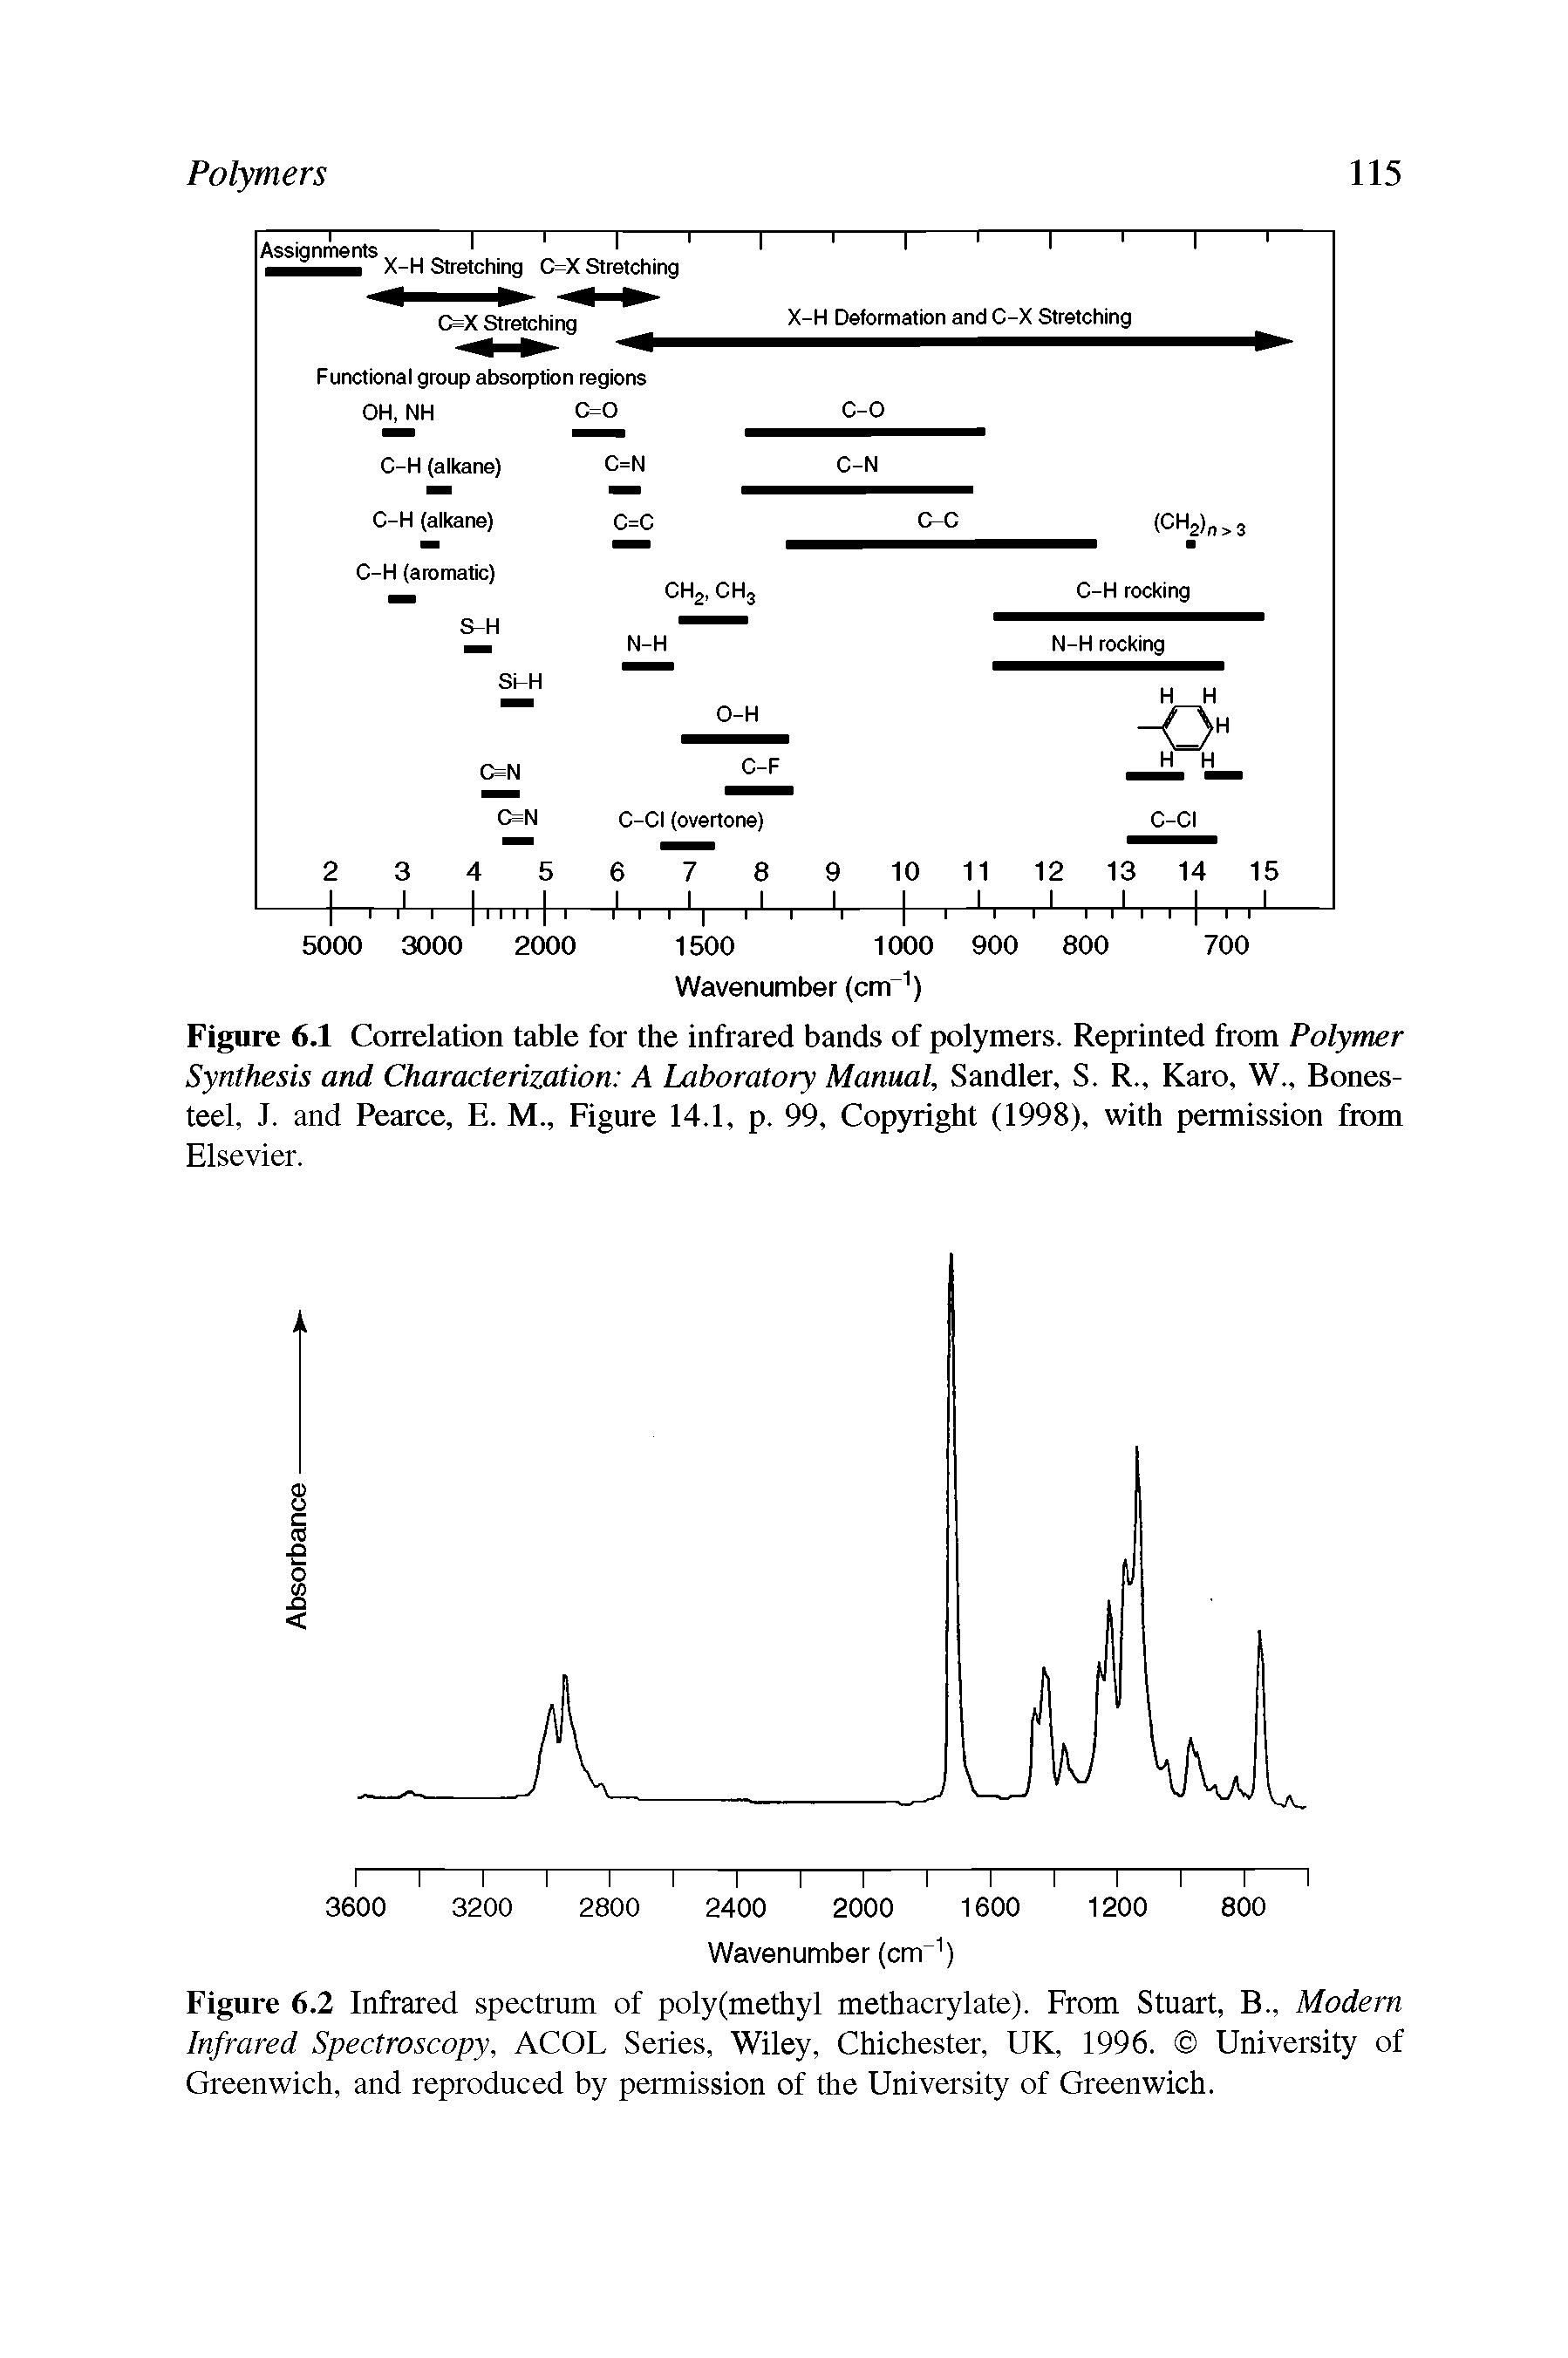 Figure 6.1 Correlation table for the infrared bands of polymers. Reprinted from Polymer Synthesis and Characterization A Laboratory Manual, Sandler, S. R., Karo, W., Bones-teel, J. and Pearce, E. M., Figure 14.1, p. 99, Copyright (1998), with permission from...